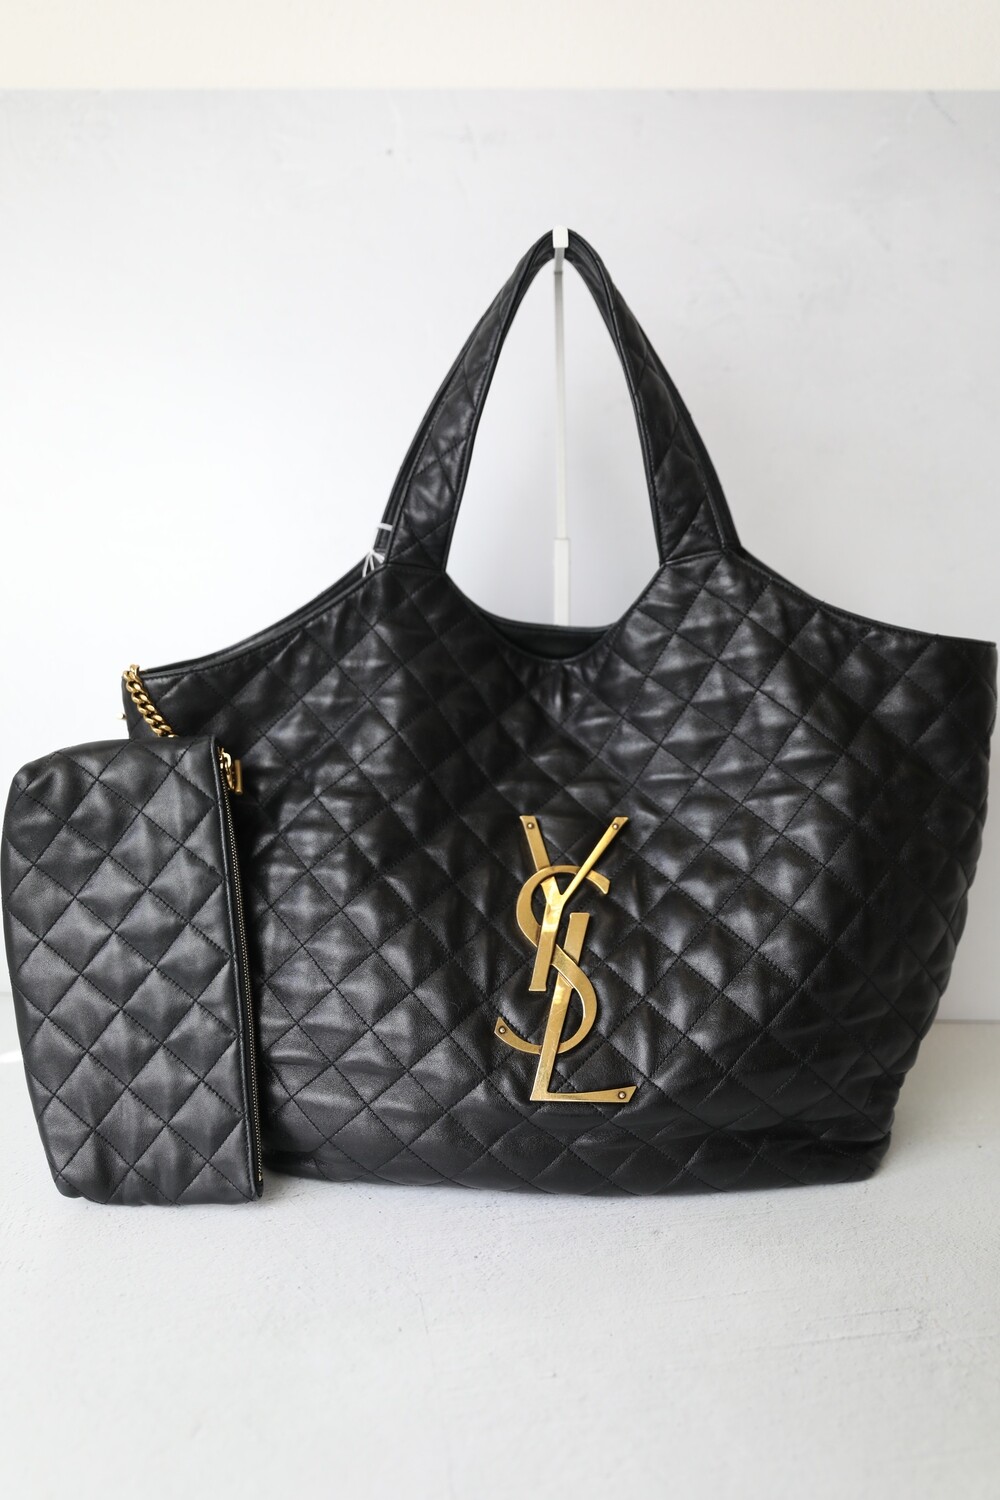 YSL ICARE MAXI SHOPPING BAG IN QUILTED LAMBSKIN for Sale